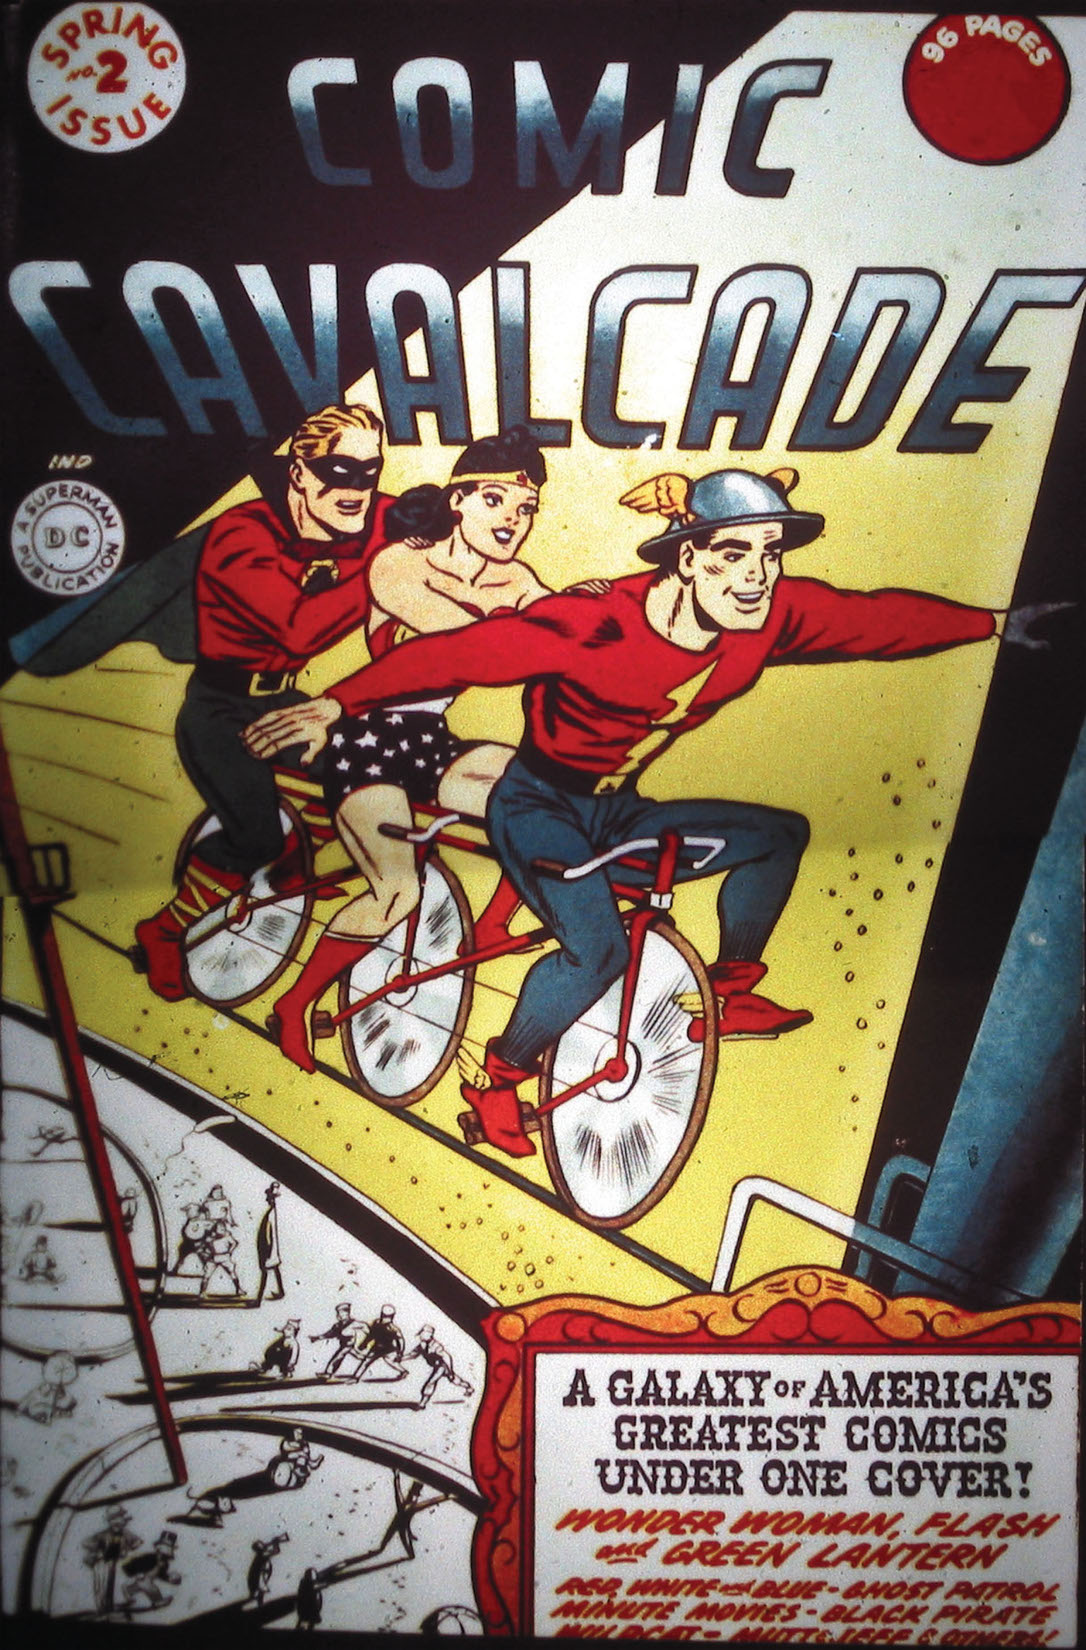 Comic Cavalcade #2 preview images